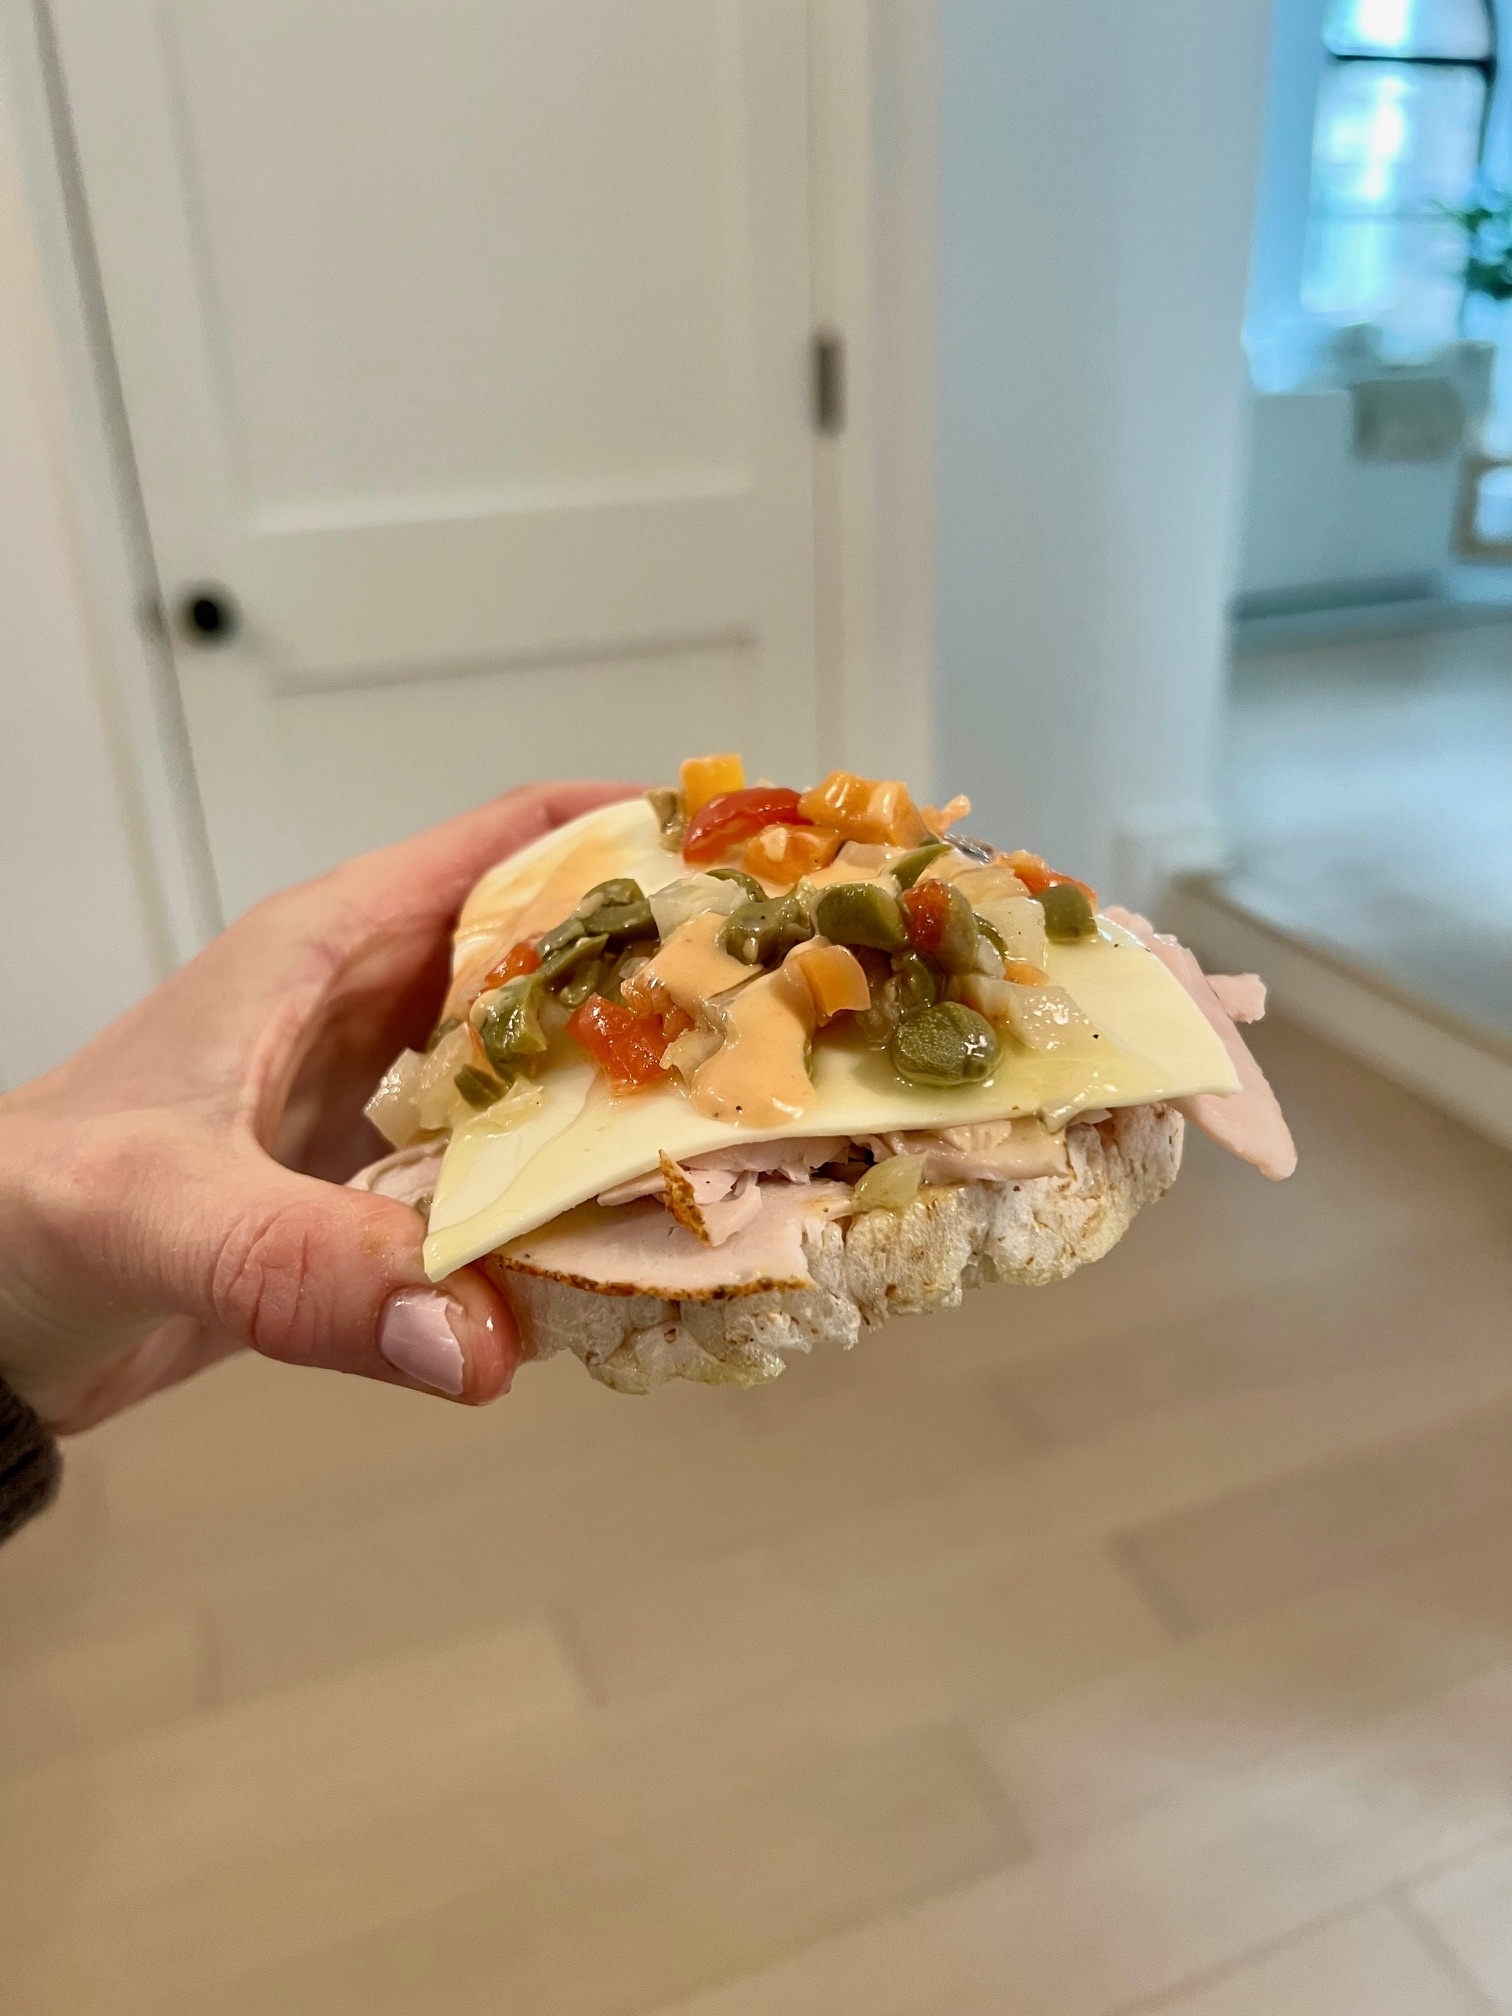 Hand holding a sandwich with turkey, cheese, and pickled vegetables